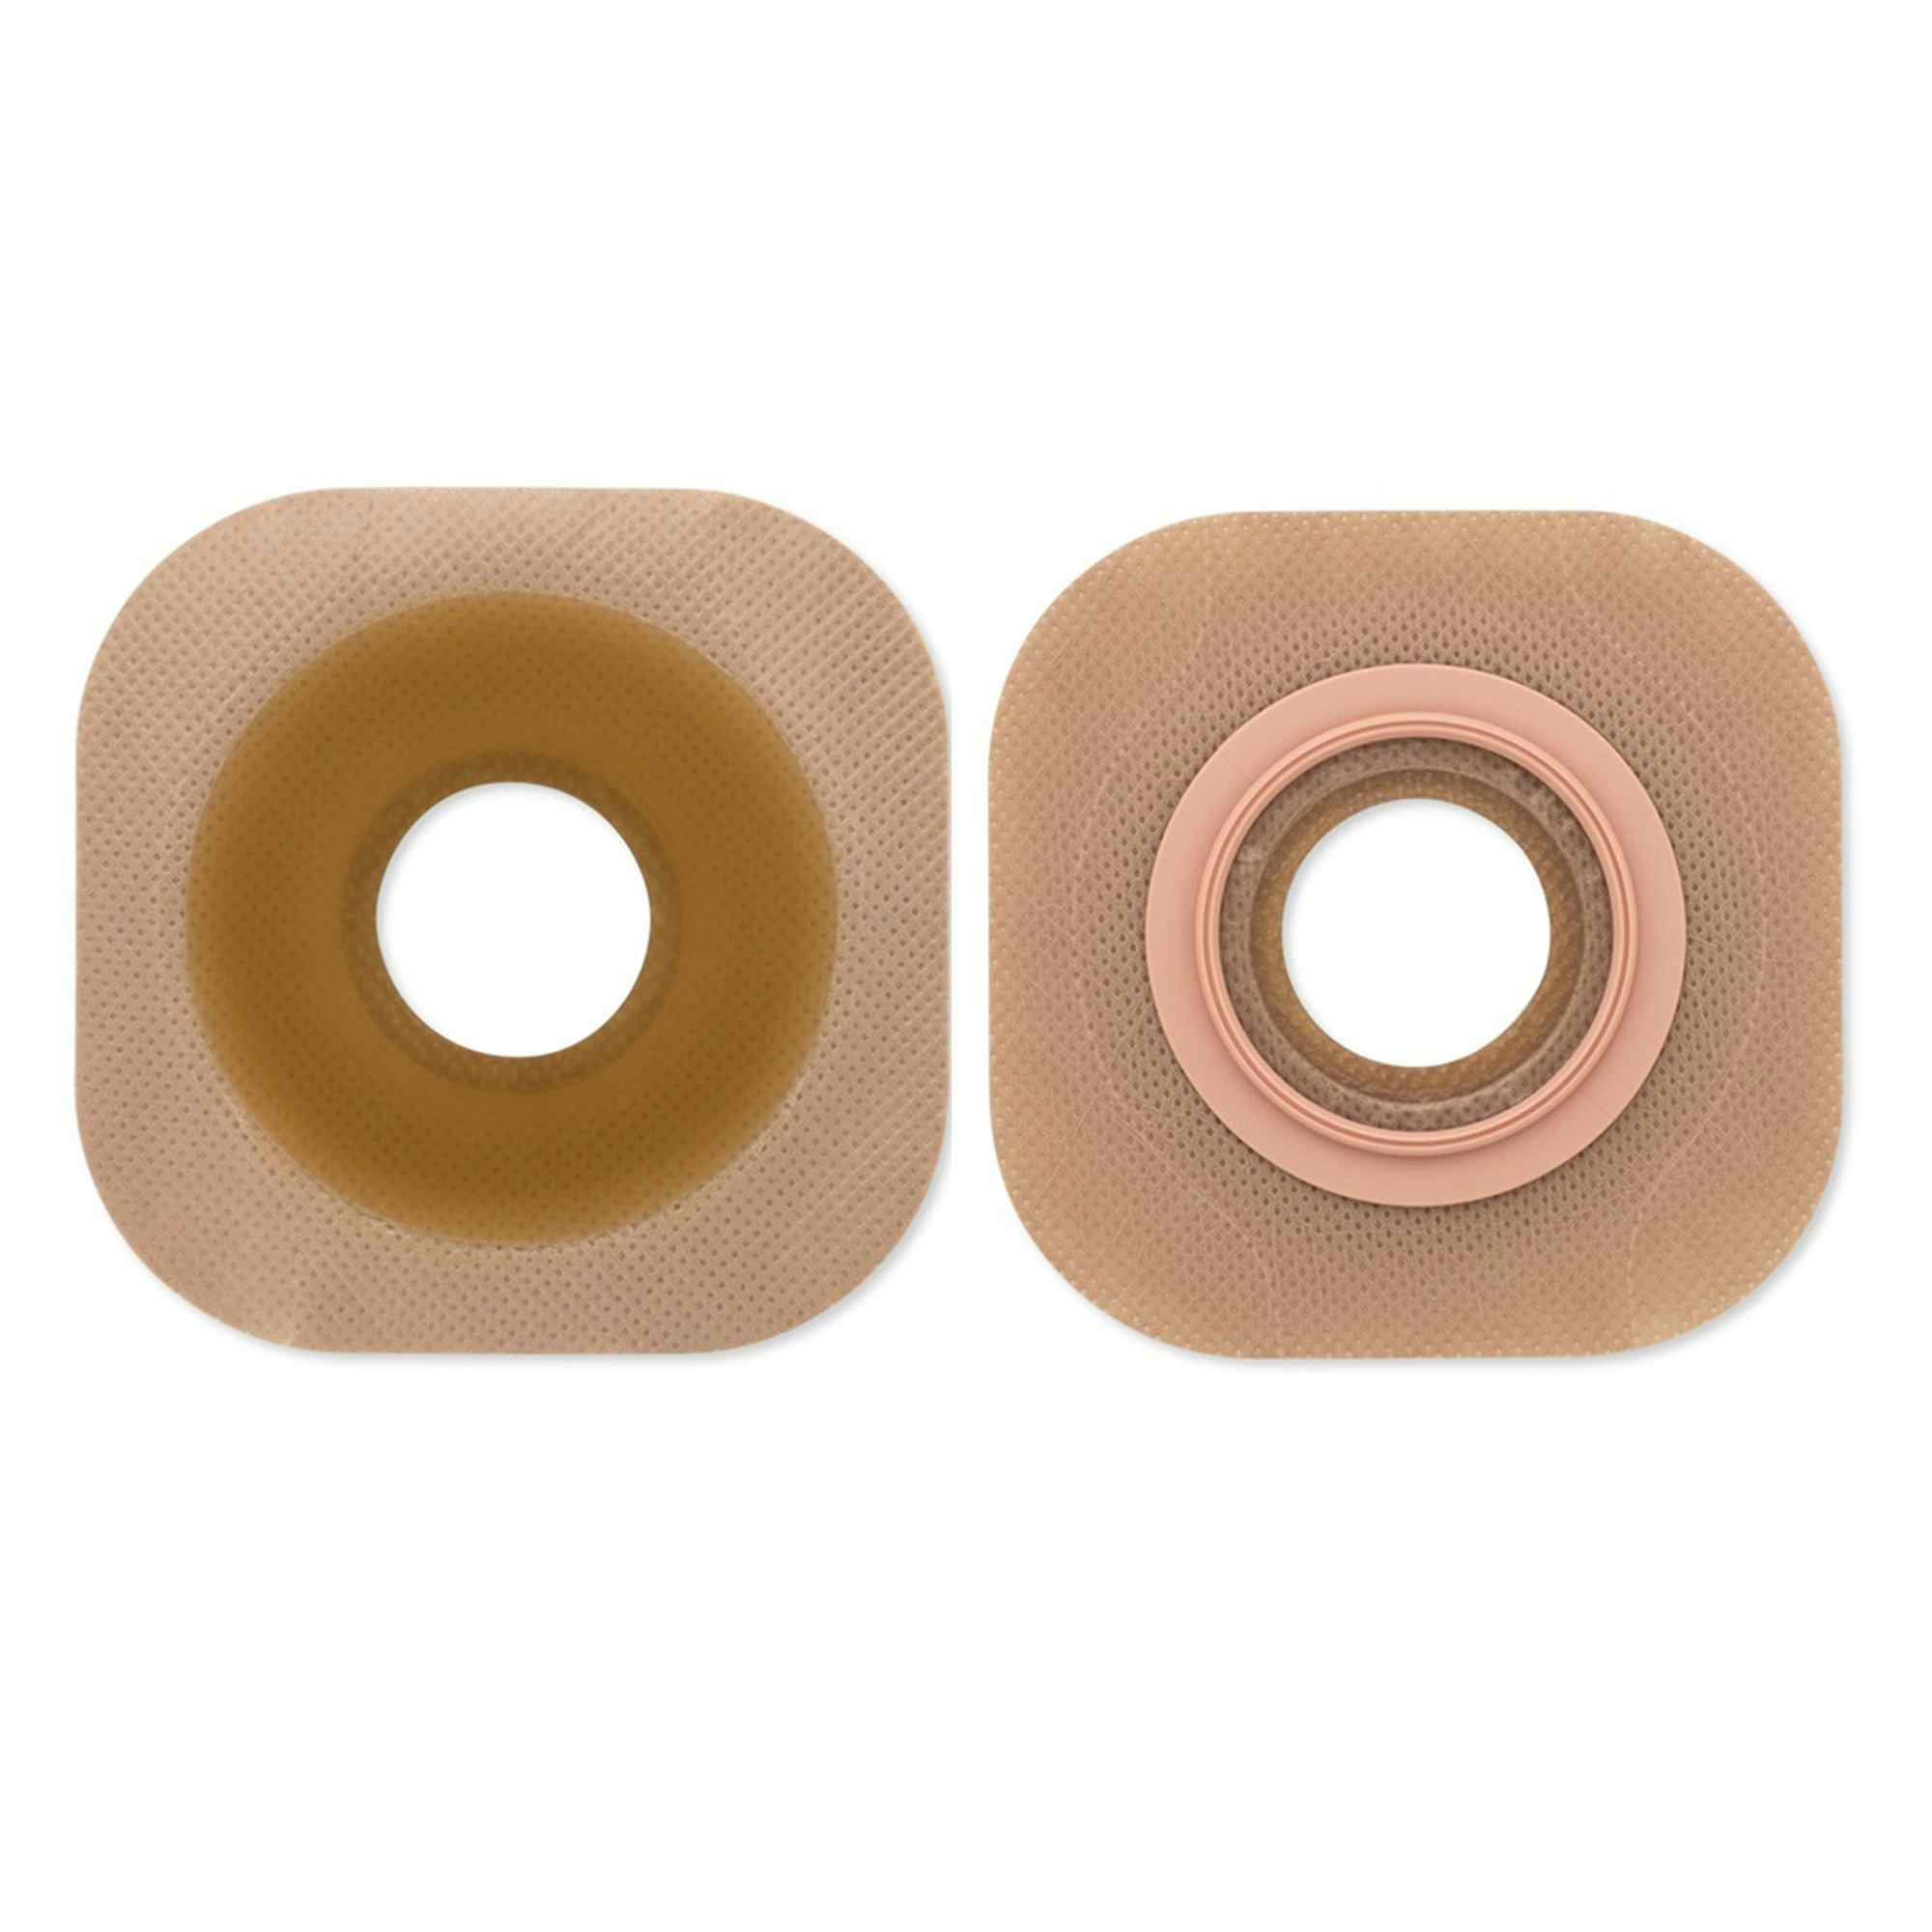 FlexTend Trim to Fit Ostomy Barrier, Green Code System, Up to 1-1/4 Inch Opening, 15602, 1 Each